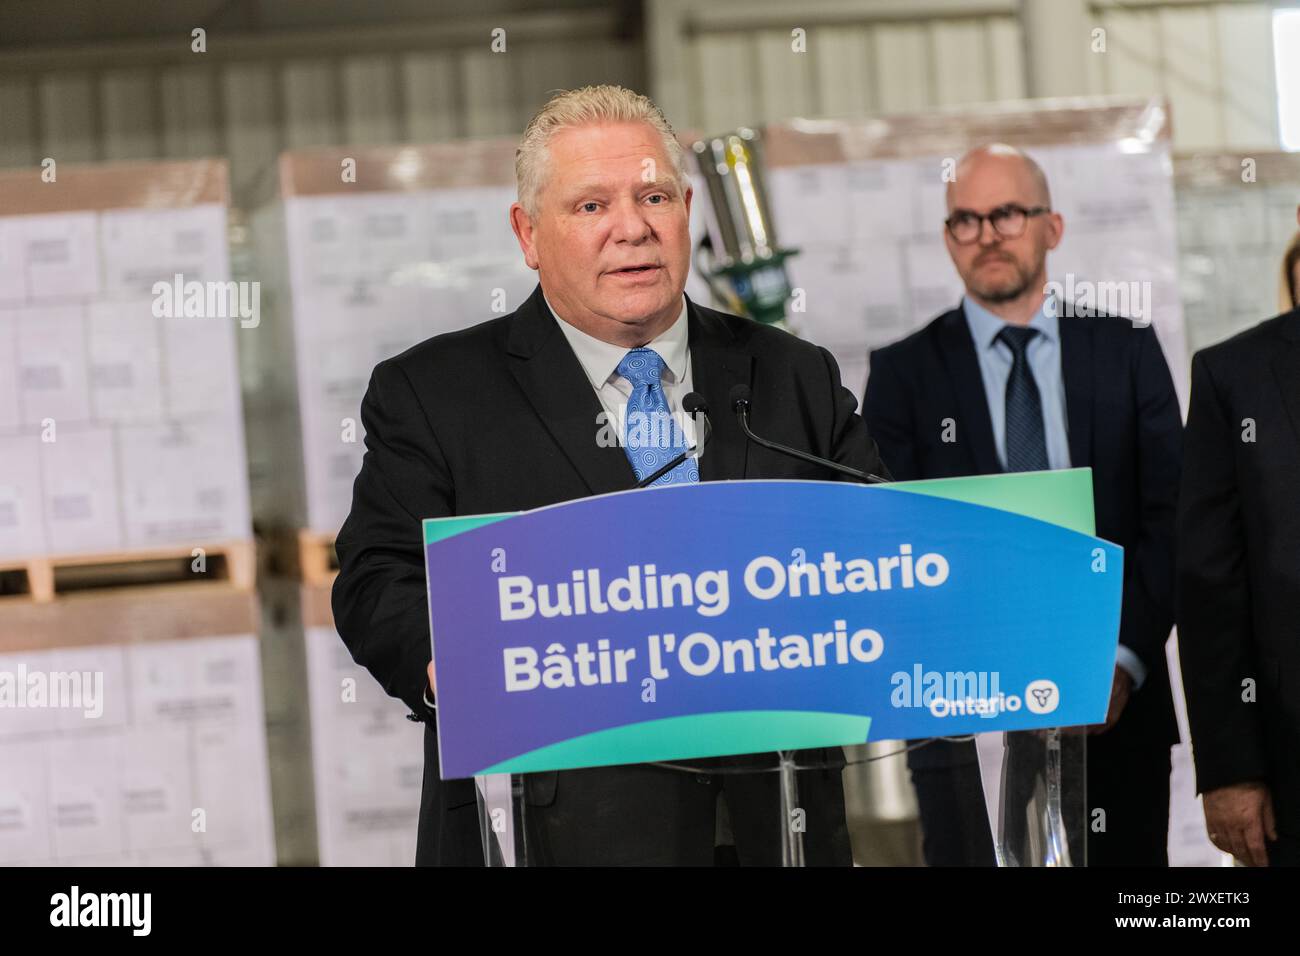 Government of Ontario Premier Doug Ford speaking at press conference Stock Photo